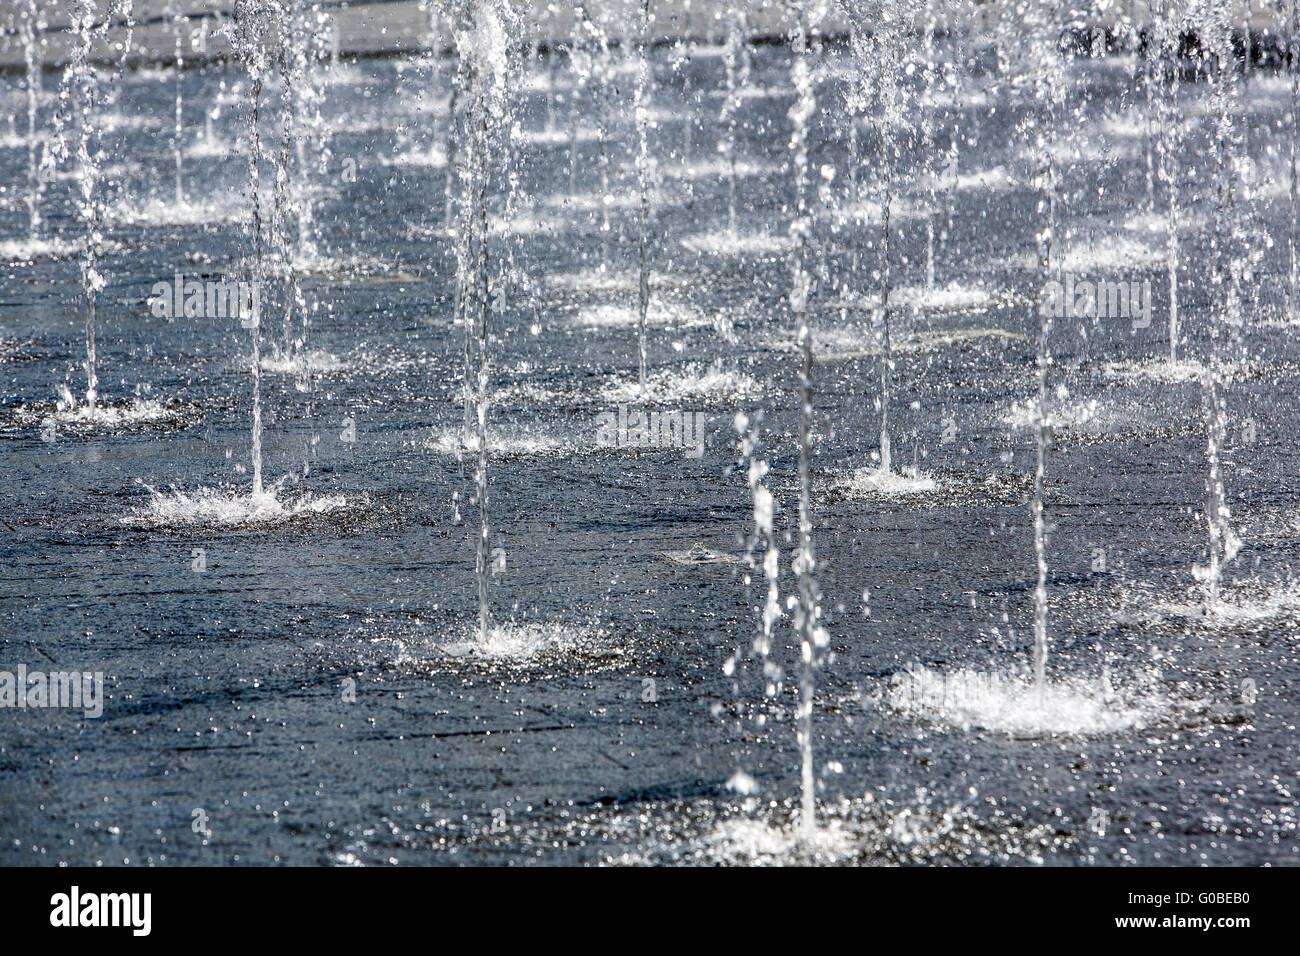 Fountain, embedded in the ground, water fountains, Stock Photo